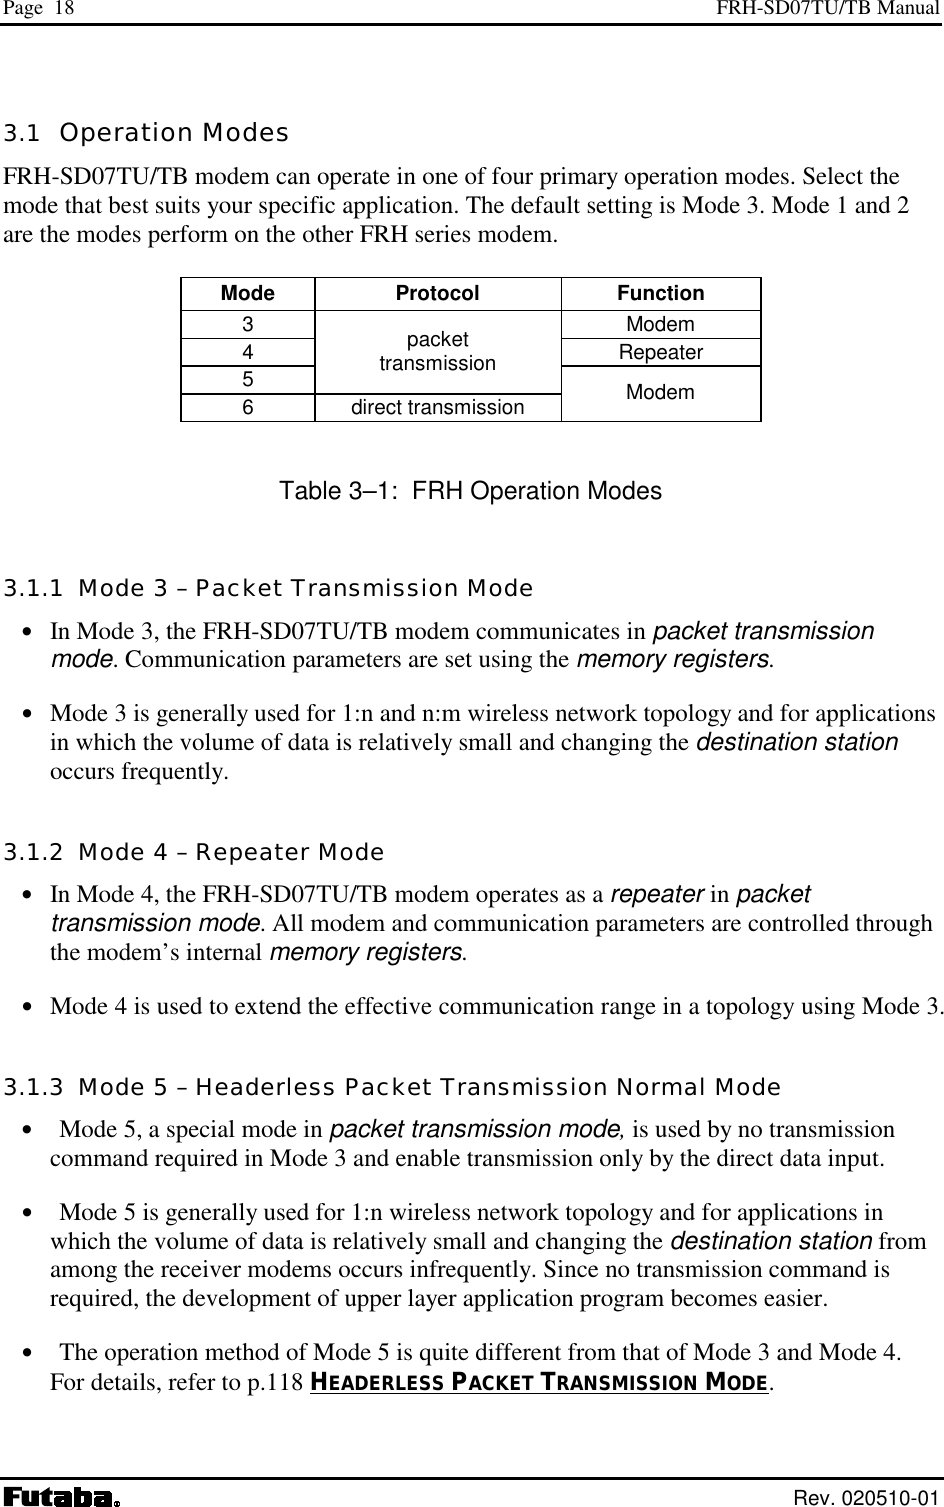 Page  18  FRH-SD07TU/TB Manual  Rev. 020510-01 3.1  Operation Modes FRH-SD07TU/TB modem can operate in one of four primary operation modes. Select the mode that best suits your specific application. The default setting is Mode 3. Mode 1 and 2 are the modes perform on the other FRH series modem.  Mode Protocol  Function 3 Modem 4 Repeater 5 packet transmission 6 direct transmission  Modem  Table 3–1:  FRH Operation Modes 3.1.1  Mode 3 – Packet Transmission Mode •  In Mode 3, the FRH-SD07TU/TB modem communicates in packet transmission mode. Communication parameters are set using the memory registers. •  Mode 3 is generally used for 1:n and n:m wireless network topology and for applications in which the volume of data is relatively small and changing the destination station occurs frequently. 3.1.2  Mode 4 – Repeater Mode •  In Mode 4, the FRH-SD07TU/TB modem operates as a repeater in packet transmission mode. All modem and communication parameters are controlled through the modem’s internal memory registers. •  Mode 4 is used to extend the effective communication range in a topology using Mode 3. 3.1.3  Mode 5 – Headerless Packet Transmission Normal Mode •  Mode 5, a special mode in packet transmission mode, is used by no transmission command required in Mode 3 and enable transmission only by the direct data input. •  Mode 5 is generally used for 1:n wireless network topology and for applications in which the volume of data is relatively small and changing the destination station from among the receiver modems occurs infrequently. Since no transmission command is required, the development of upper layer application program becomes easier. •  The operation method of Mode 5 is quite different from that of Mode 3 and Mode 4. For details, refer to p.118 HEADERLESS PACKET TRANSMISSION MODE. 